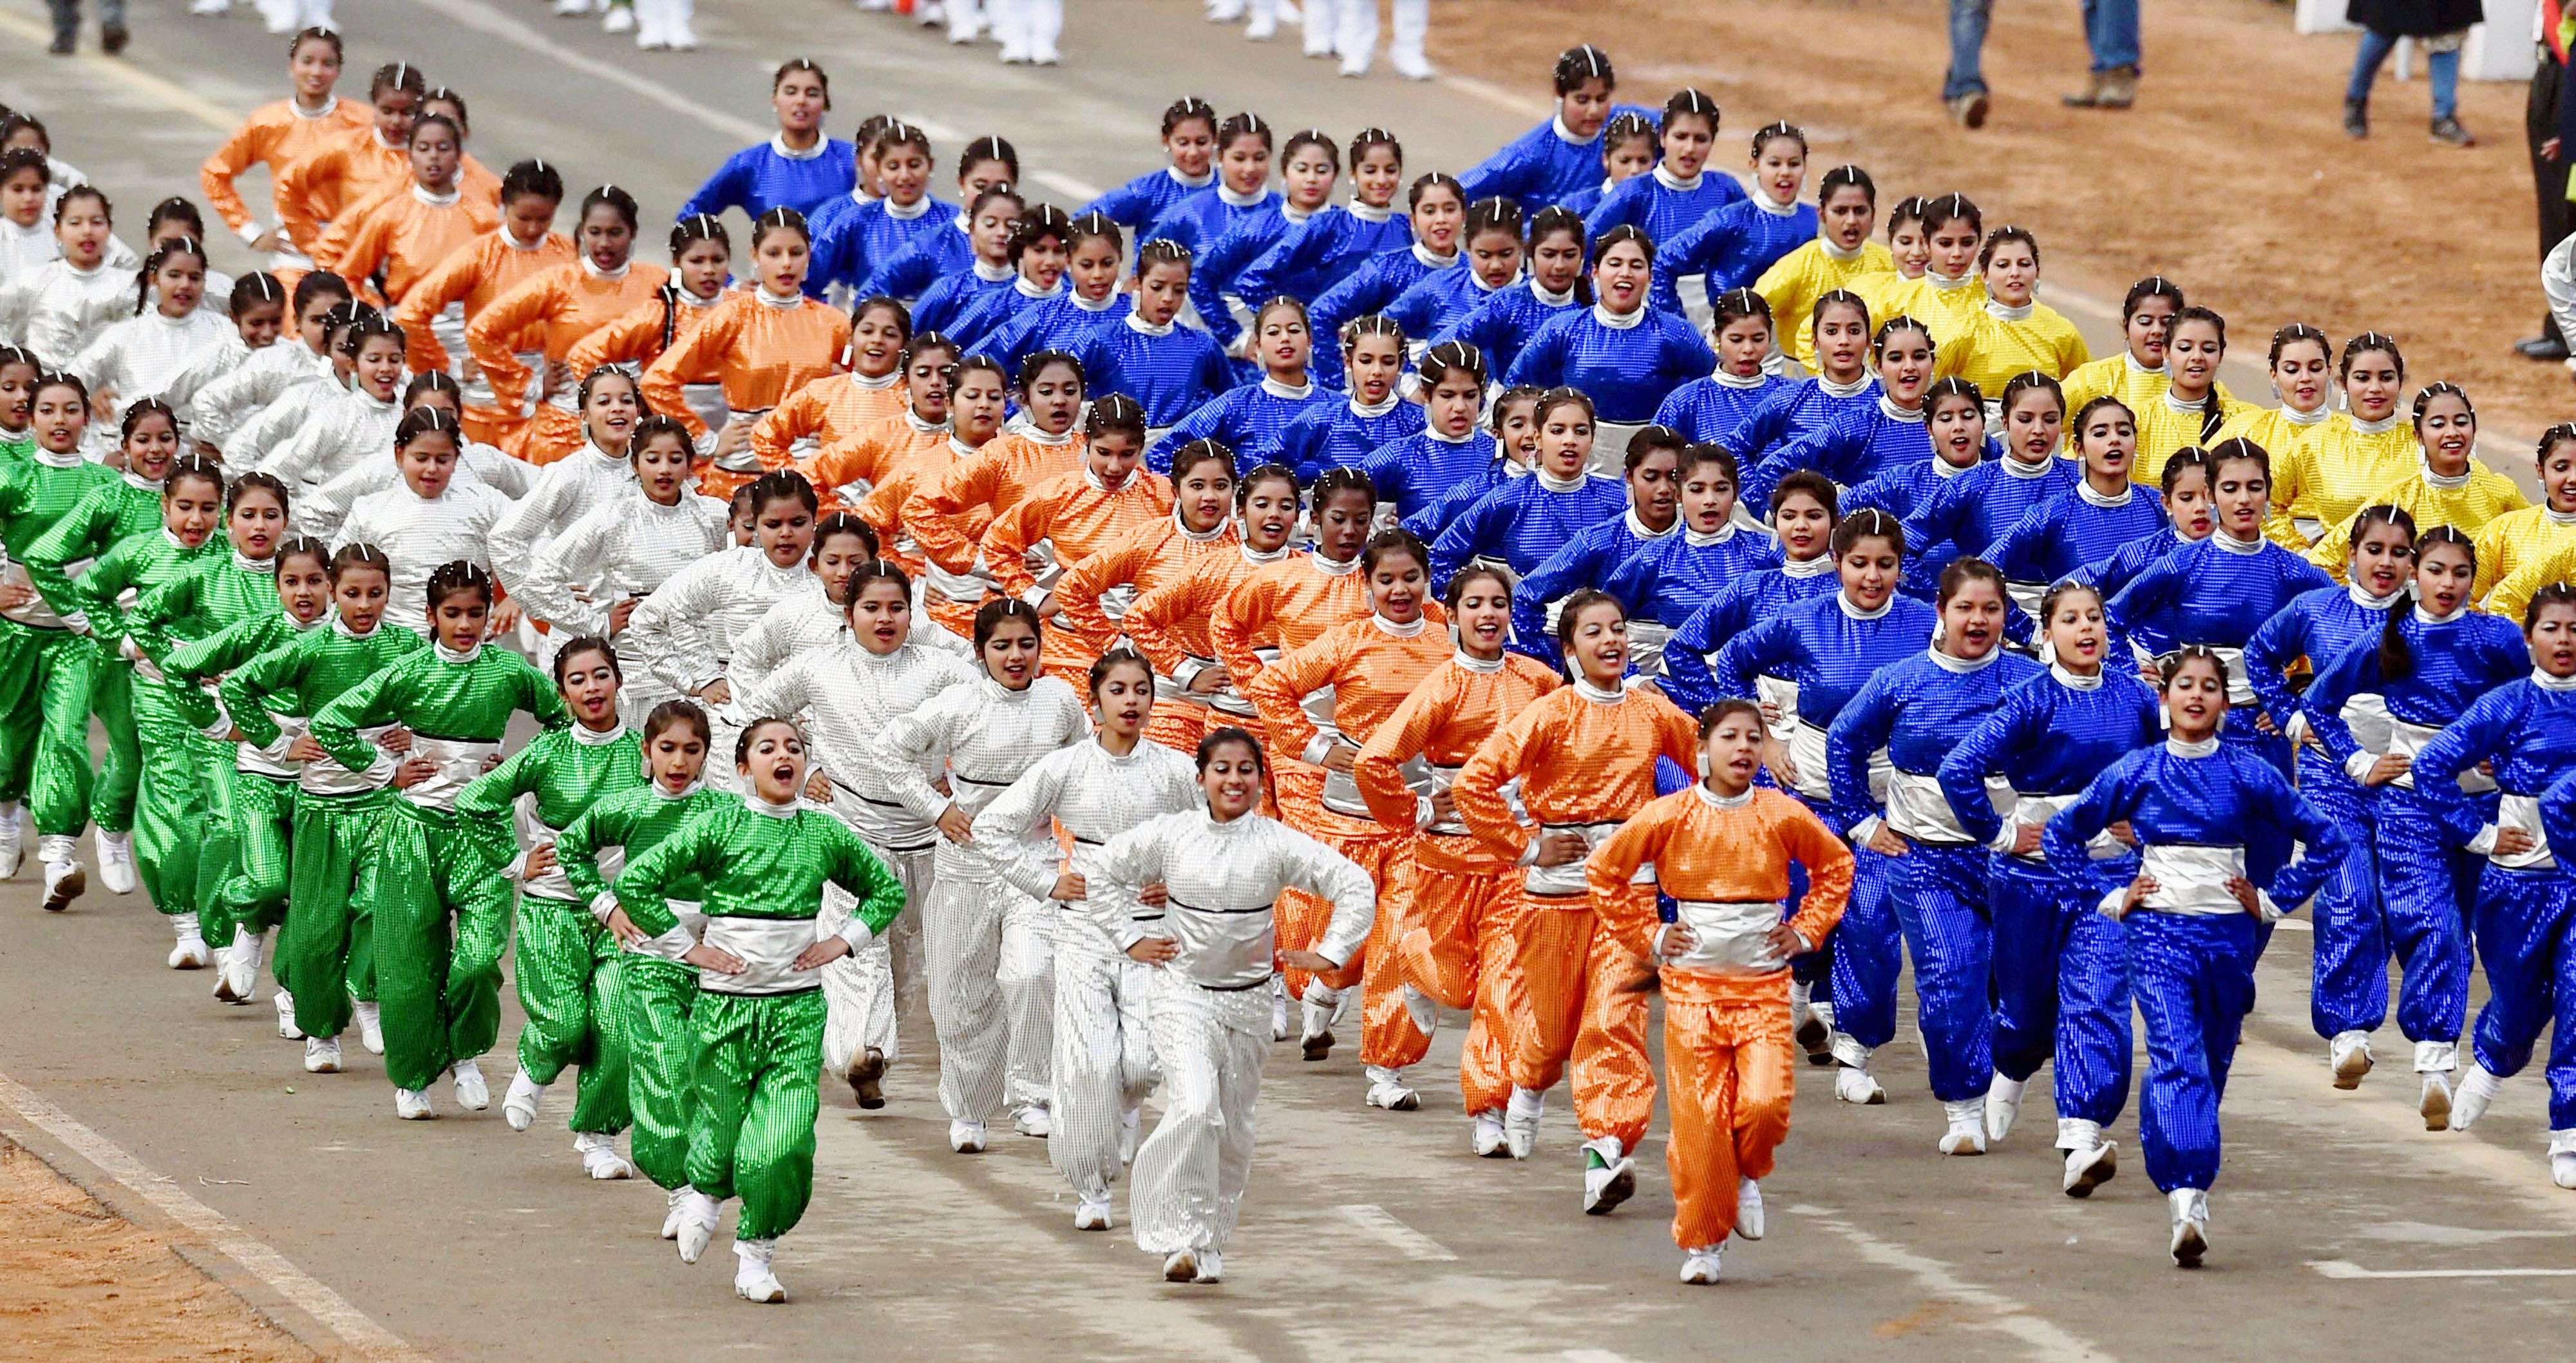 School children perform during the full dress rehearsal for the Republic Day parade at Rajpath in New Delhi. (PTI photo by Atul Yadav)